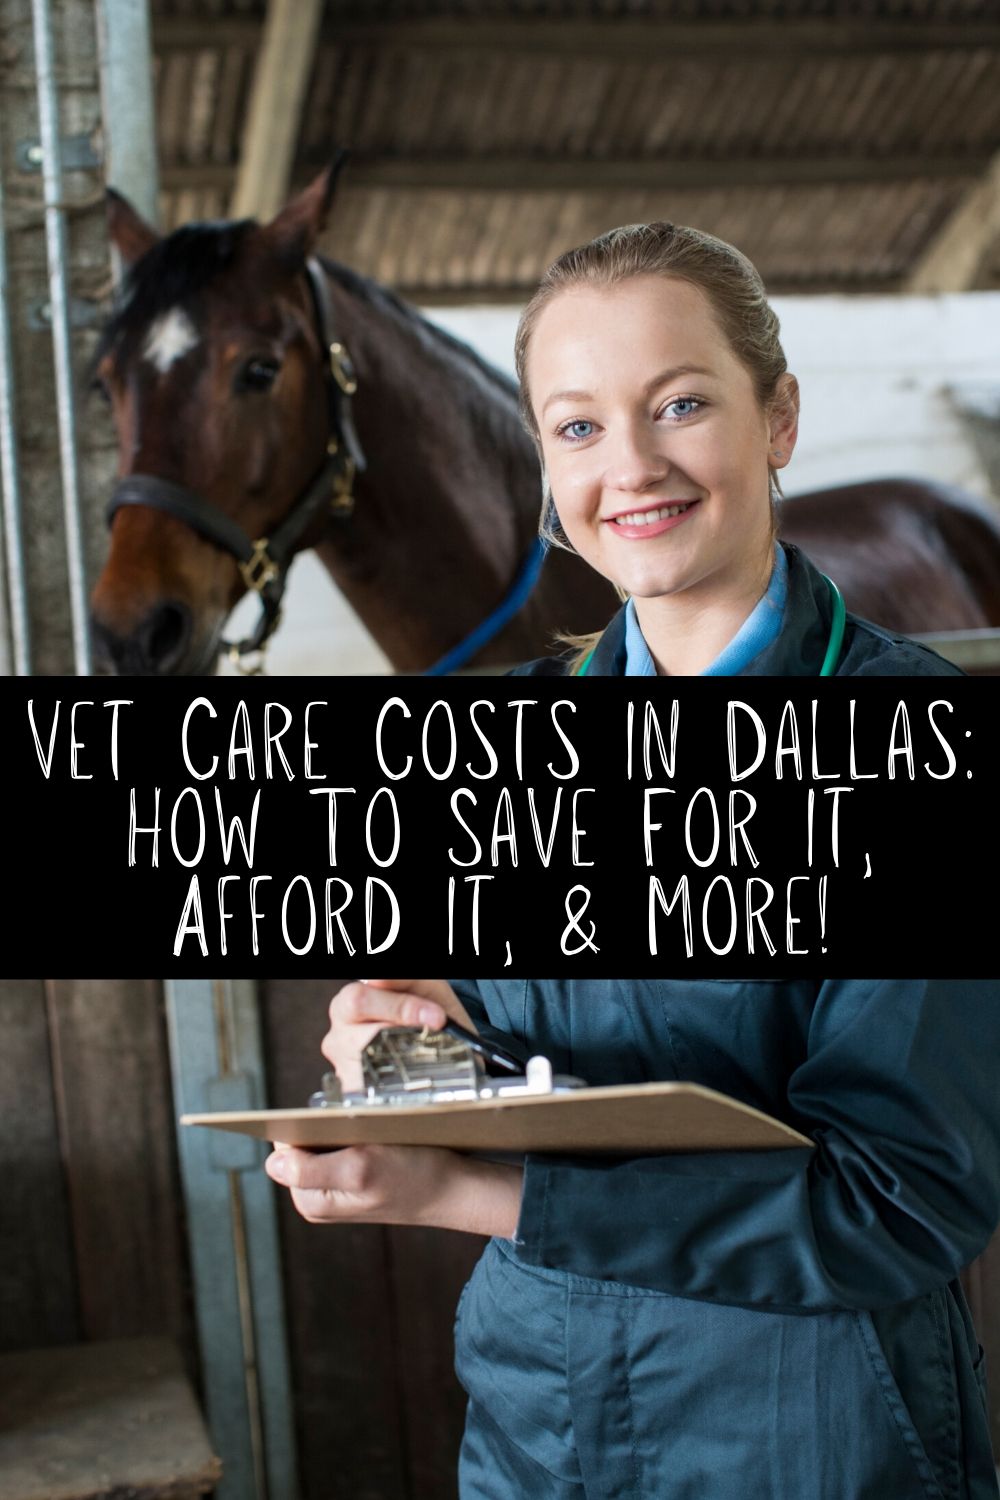 Vet care costs in Dallas and around the globe can be tricky. They can pop up out of nowhere and derail our finances if we aren't careful. Here are some tips to help you be prepared along with some recommendations for a Dallas veterinarian! 